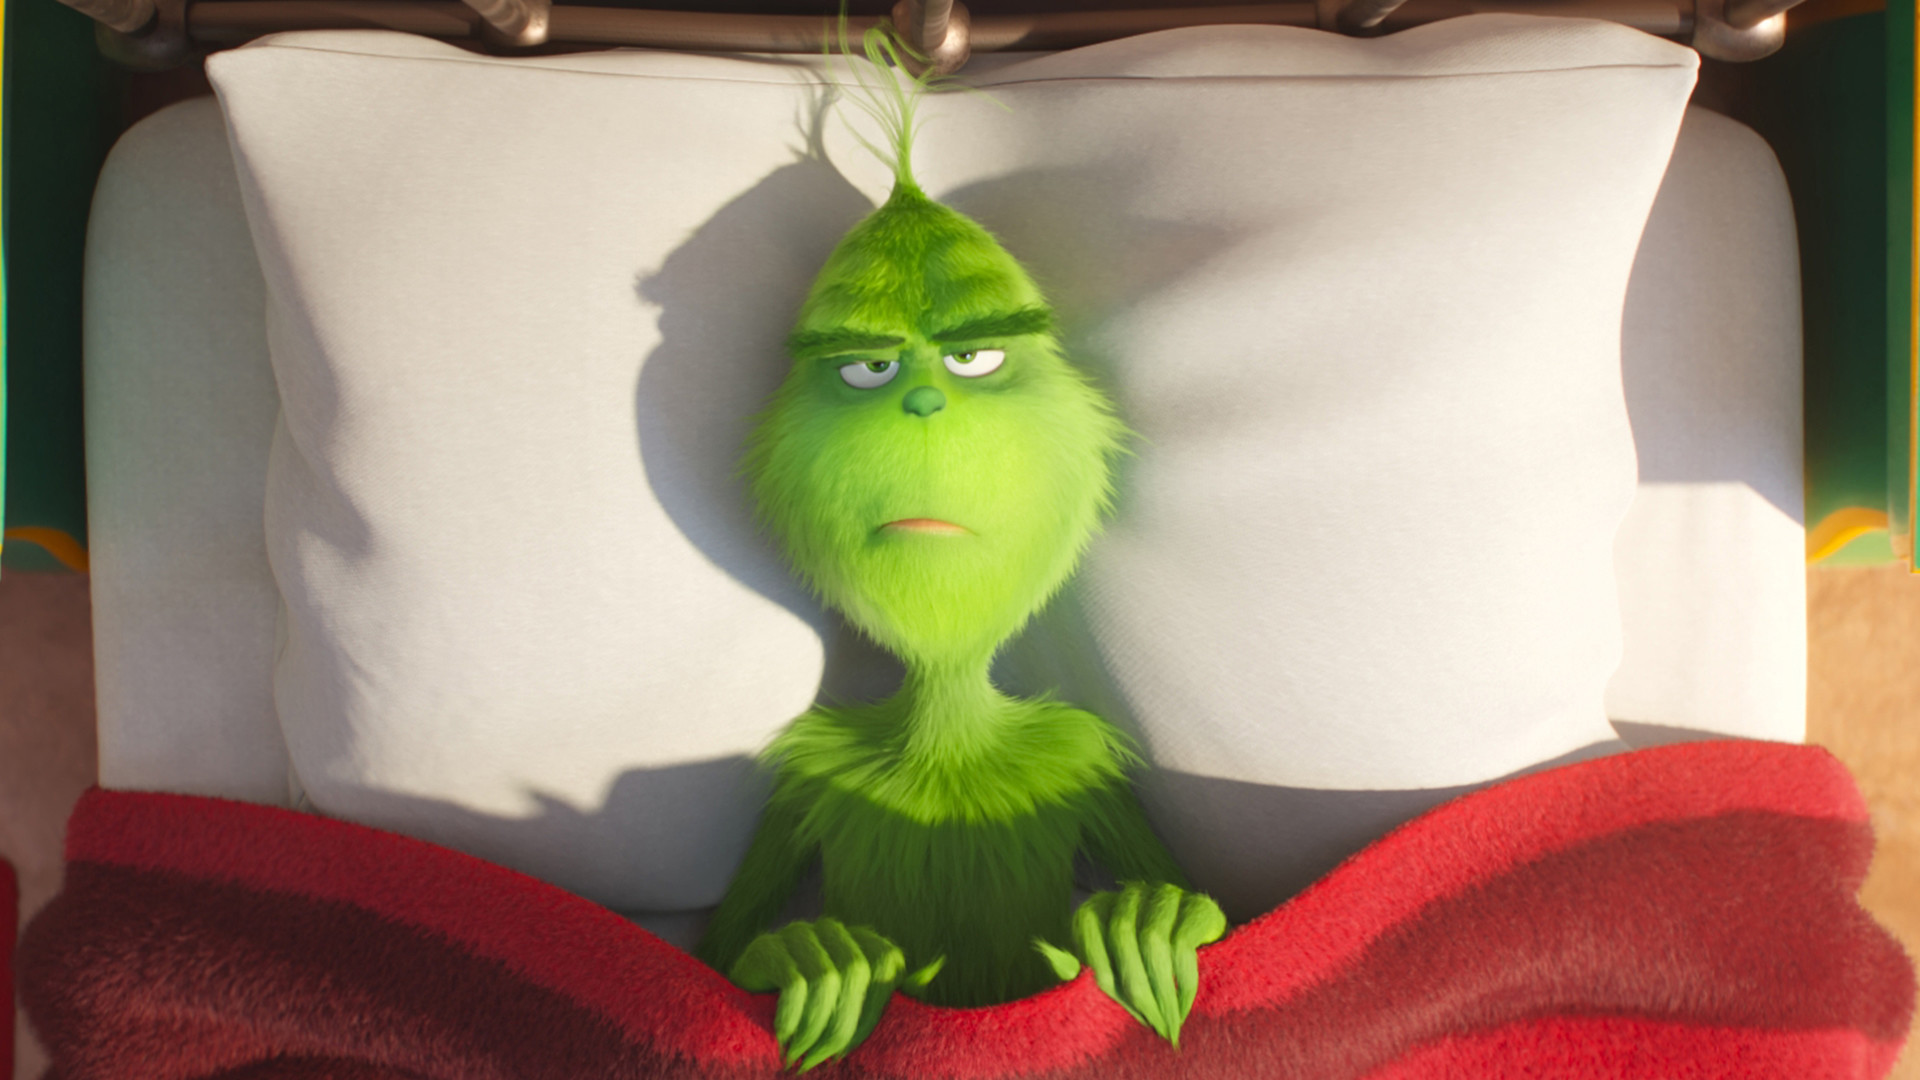 1920x1080 Is Dr Seuss's Christmas-hating Grinch scary or kid-friendly cuddly? Read the  Movies4Kids review.